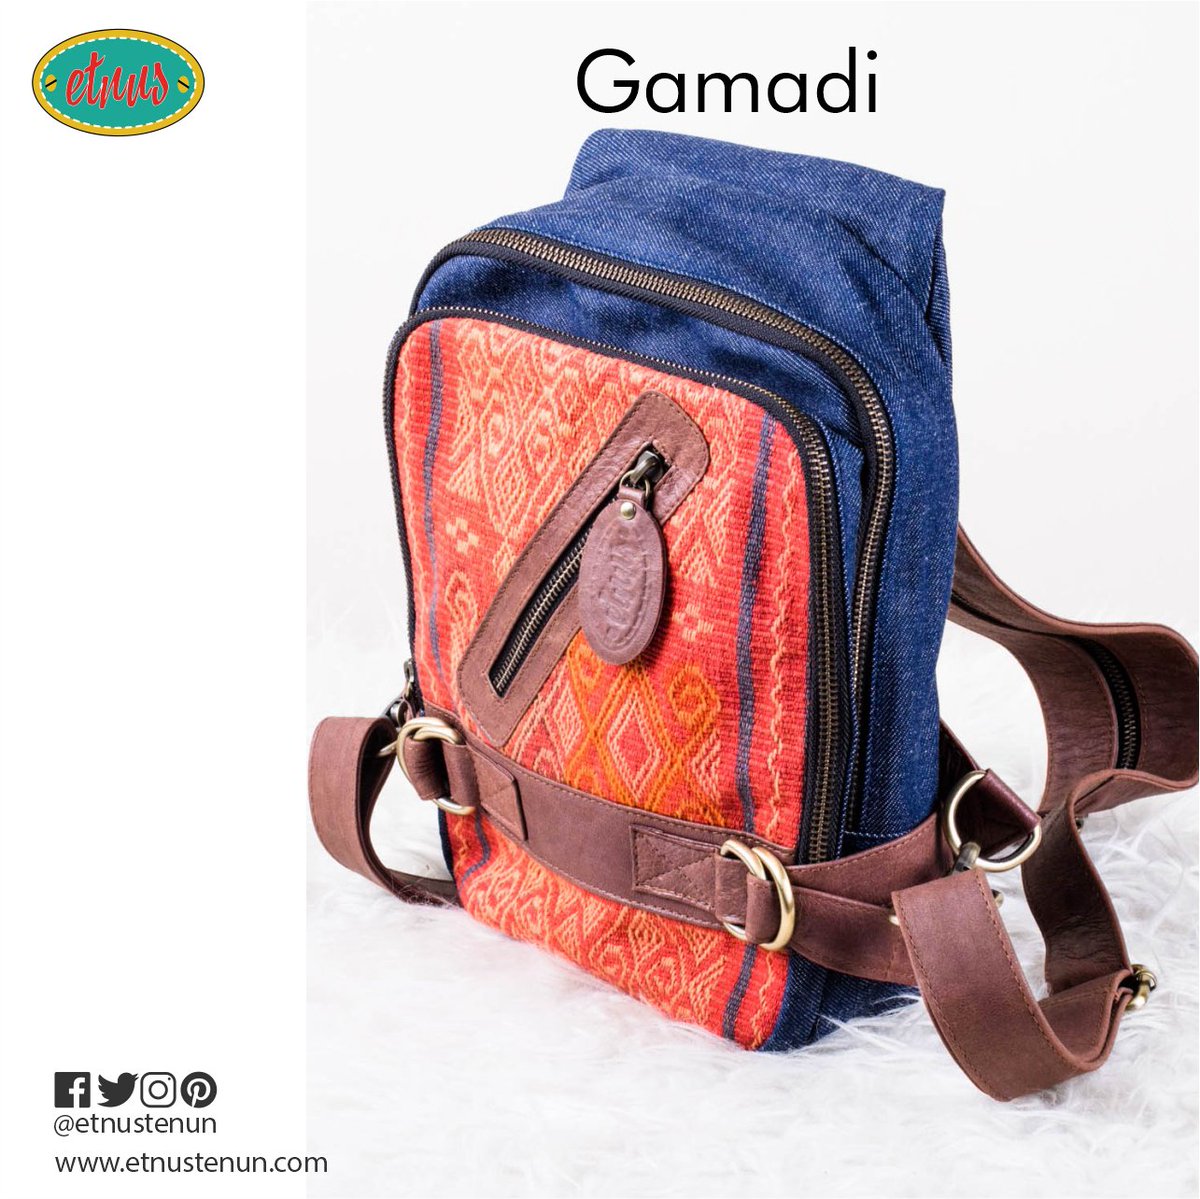 Be prepared for the end of January by purchasing a switchable backpack to shoulder bag. Ready to get through in February?

#casualbag

#backpackforwoman

#casualbackpack

#casualstyle

#ethnicstyle

#denimbag

#tasetnik

#tasranselwanita

#giniginigoonline